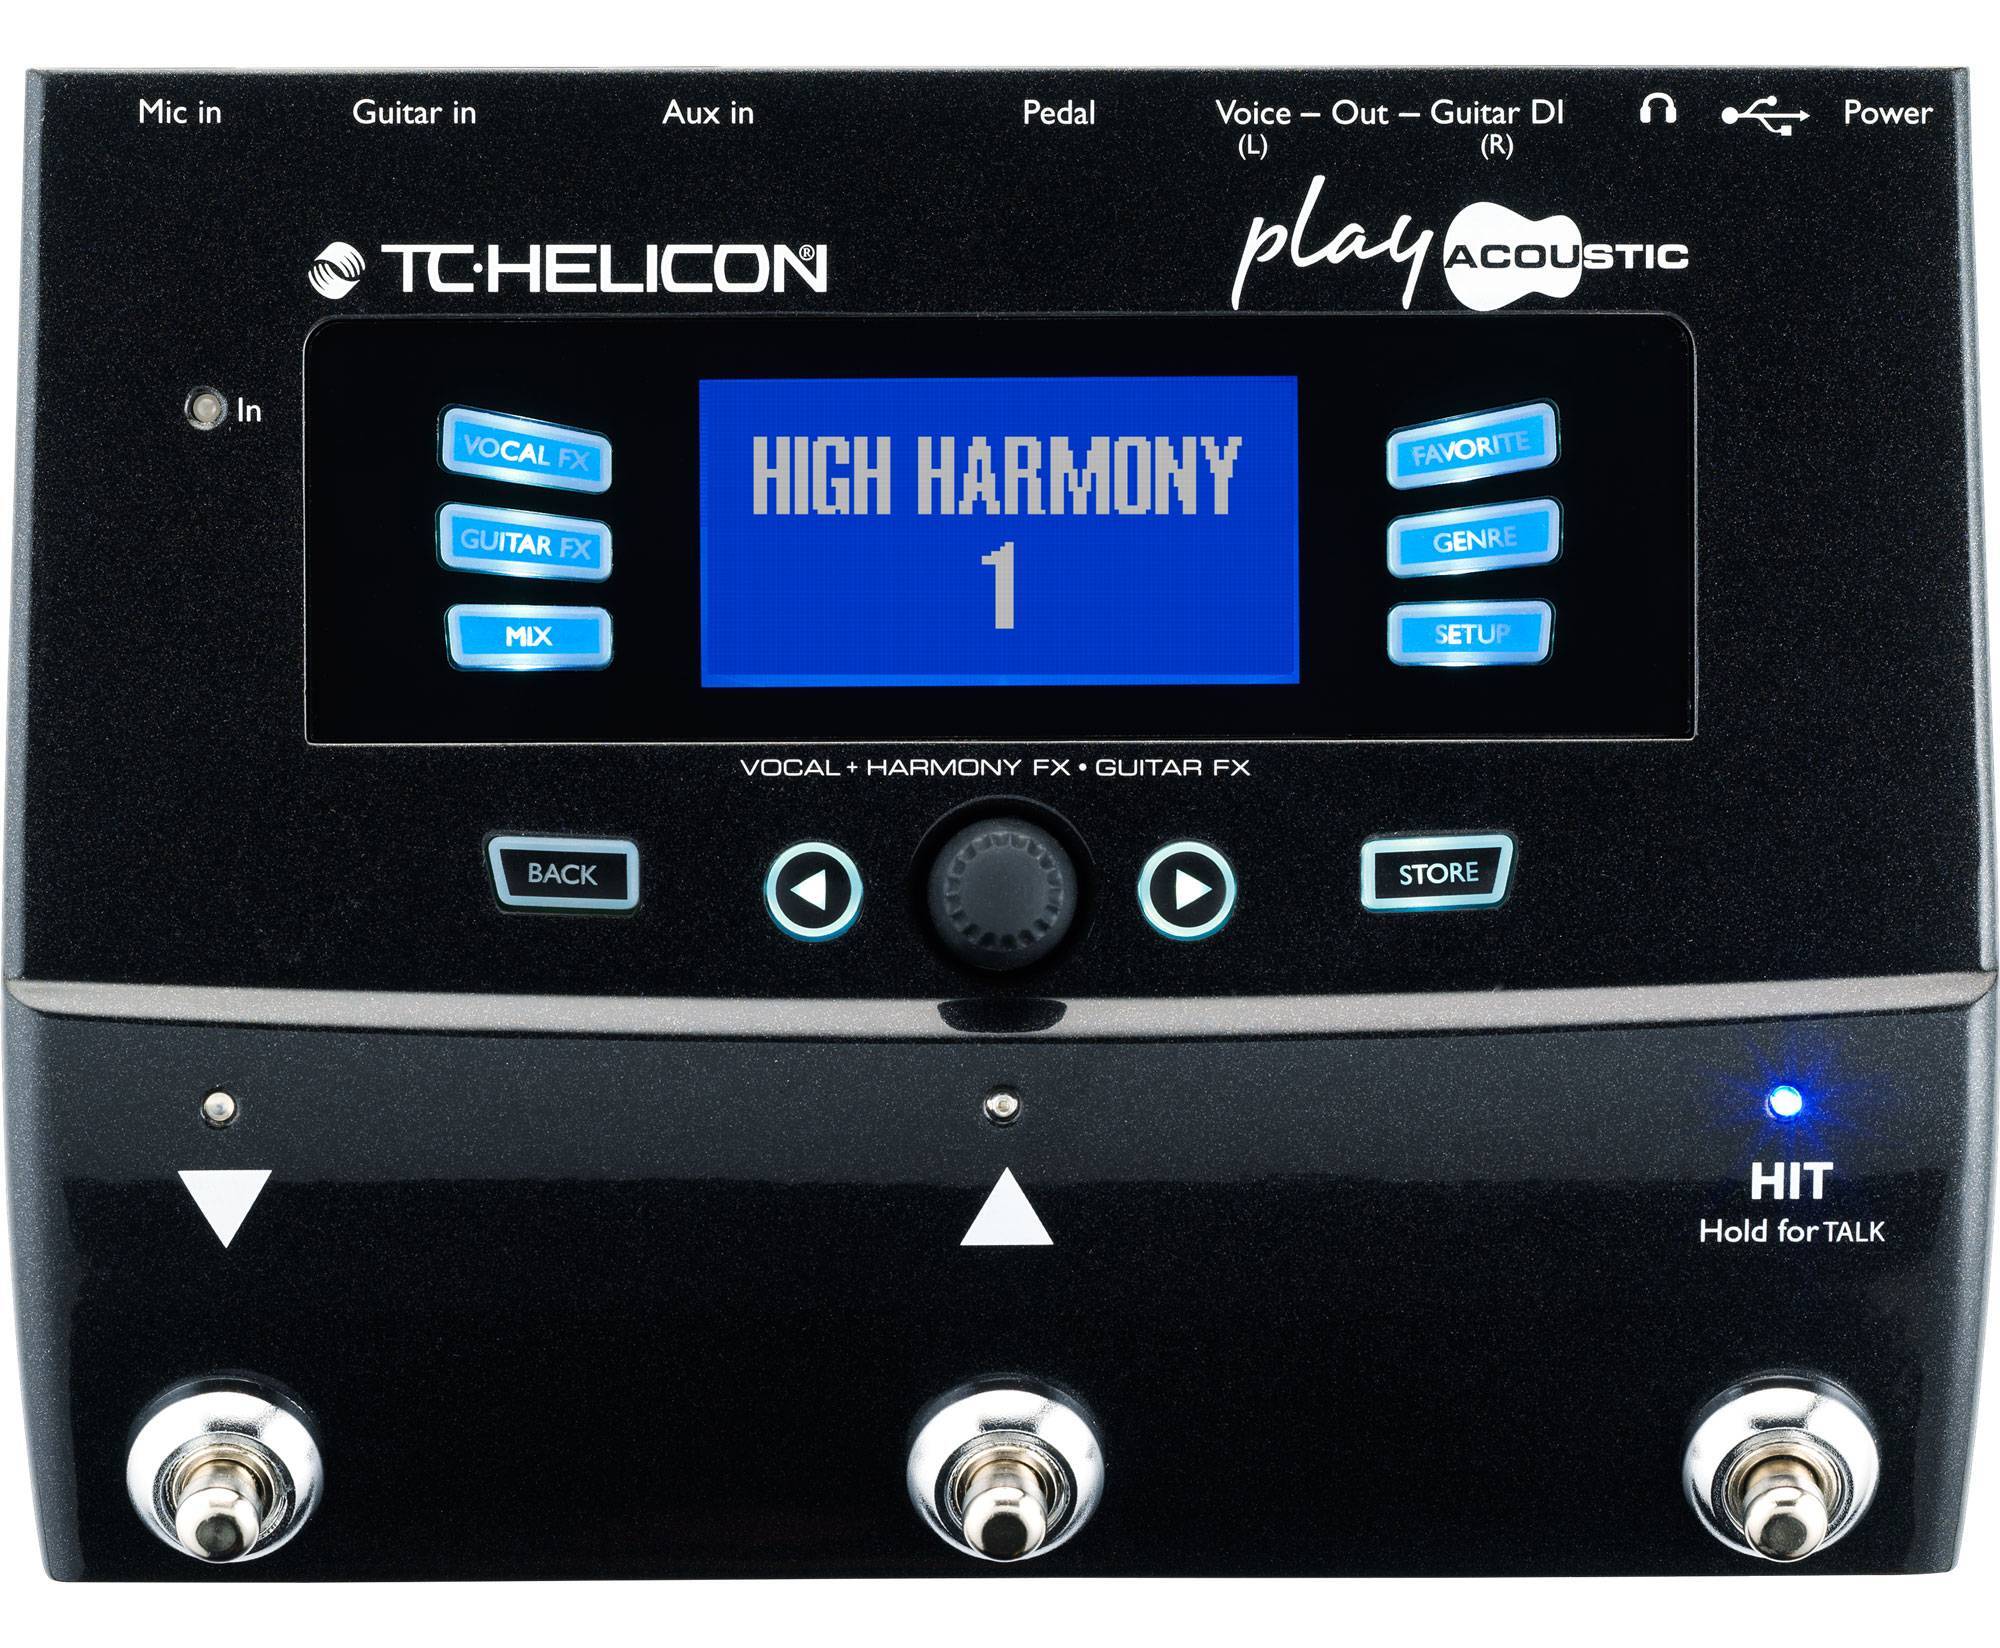 Вокальный helicon. Вокальный процессор Helicon. Вокальный процессор TC Helicon. TC Helicon Harmony v60. TC Helicon Play Acoustic.